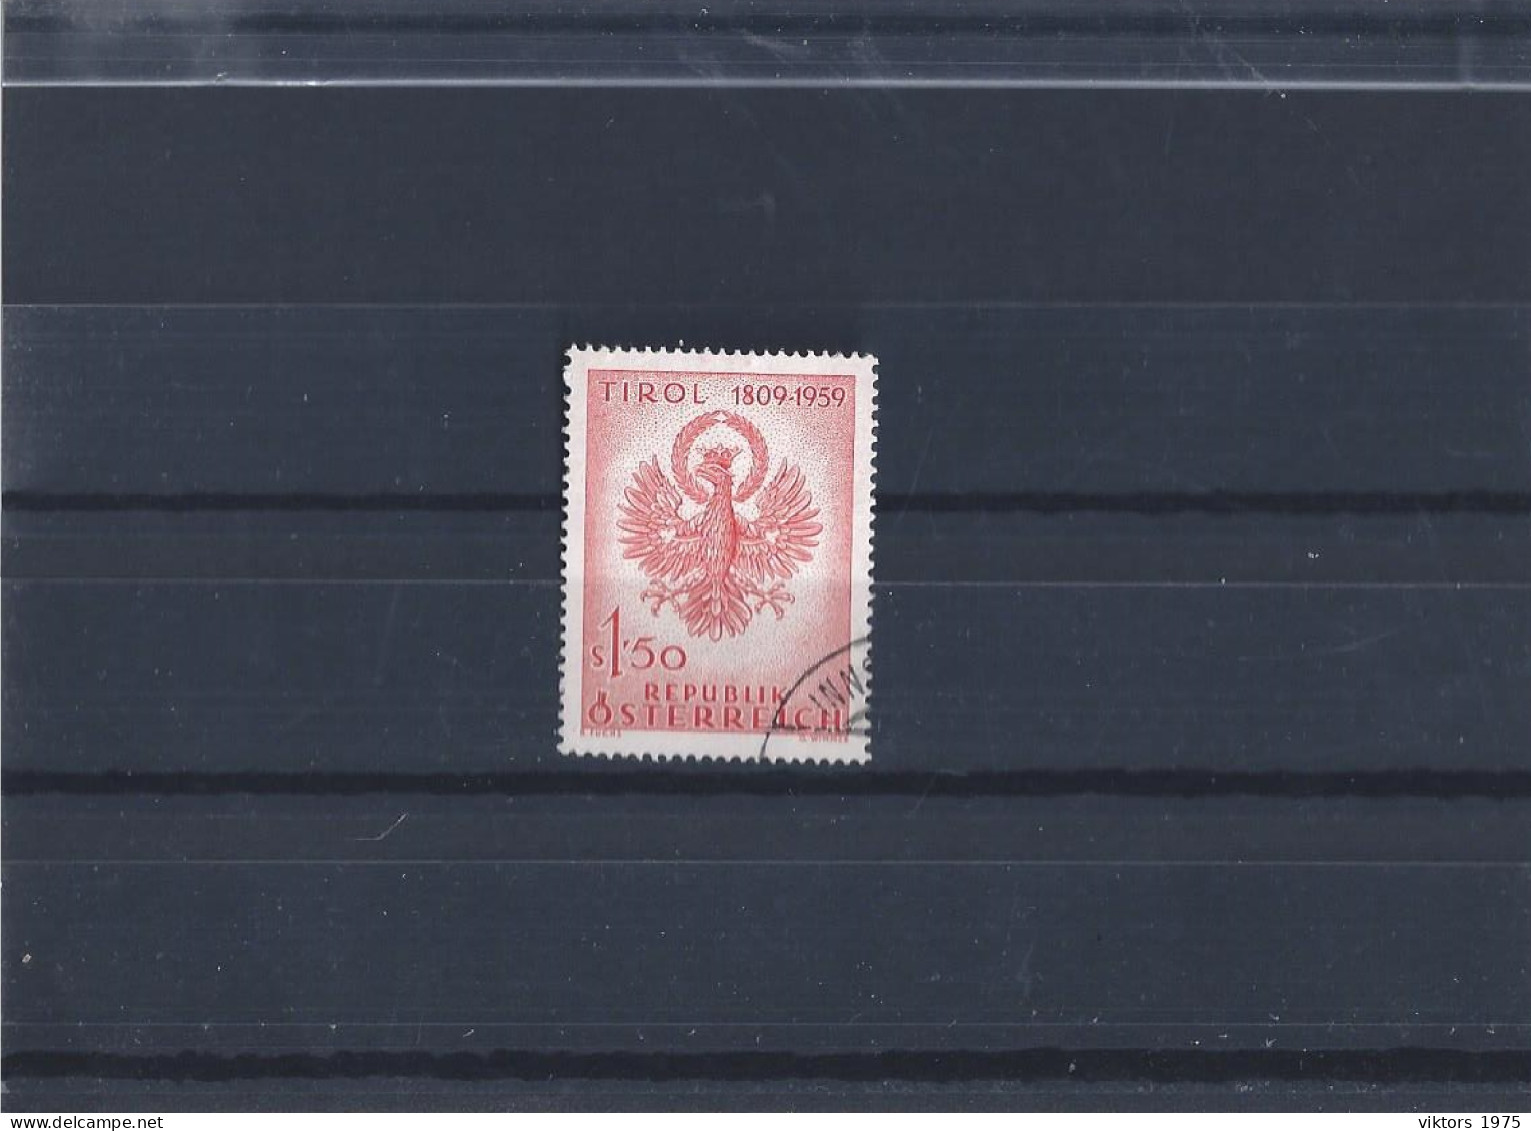 Used Stamp Nr.1067 In MICHEL Catalog - Used Stamps